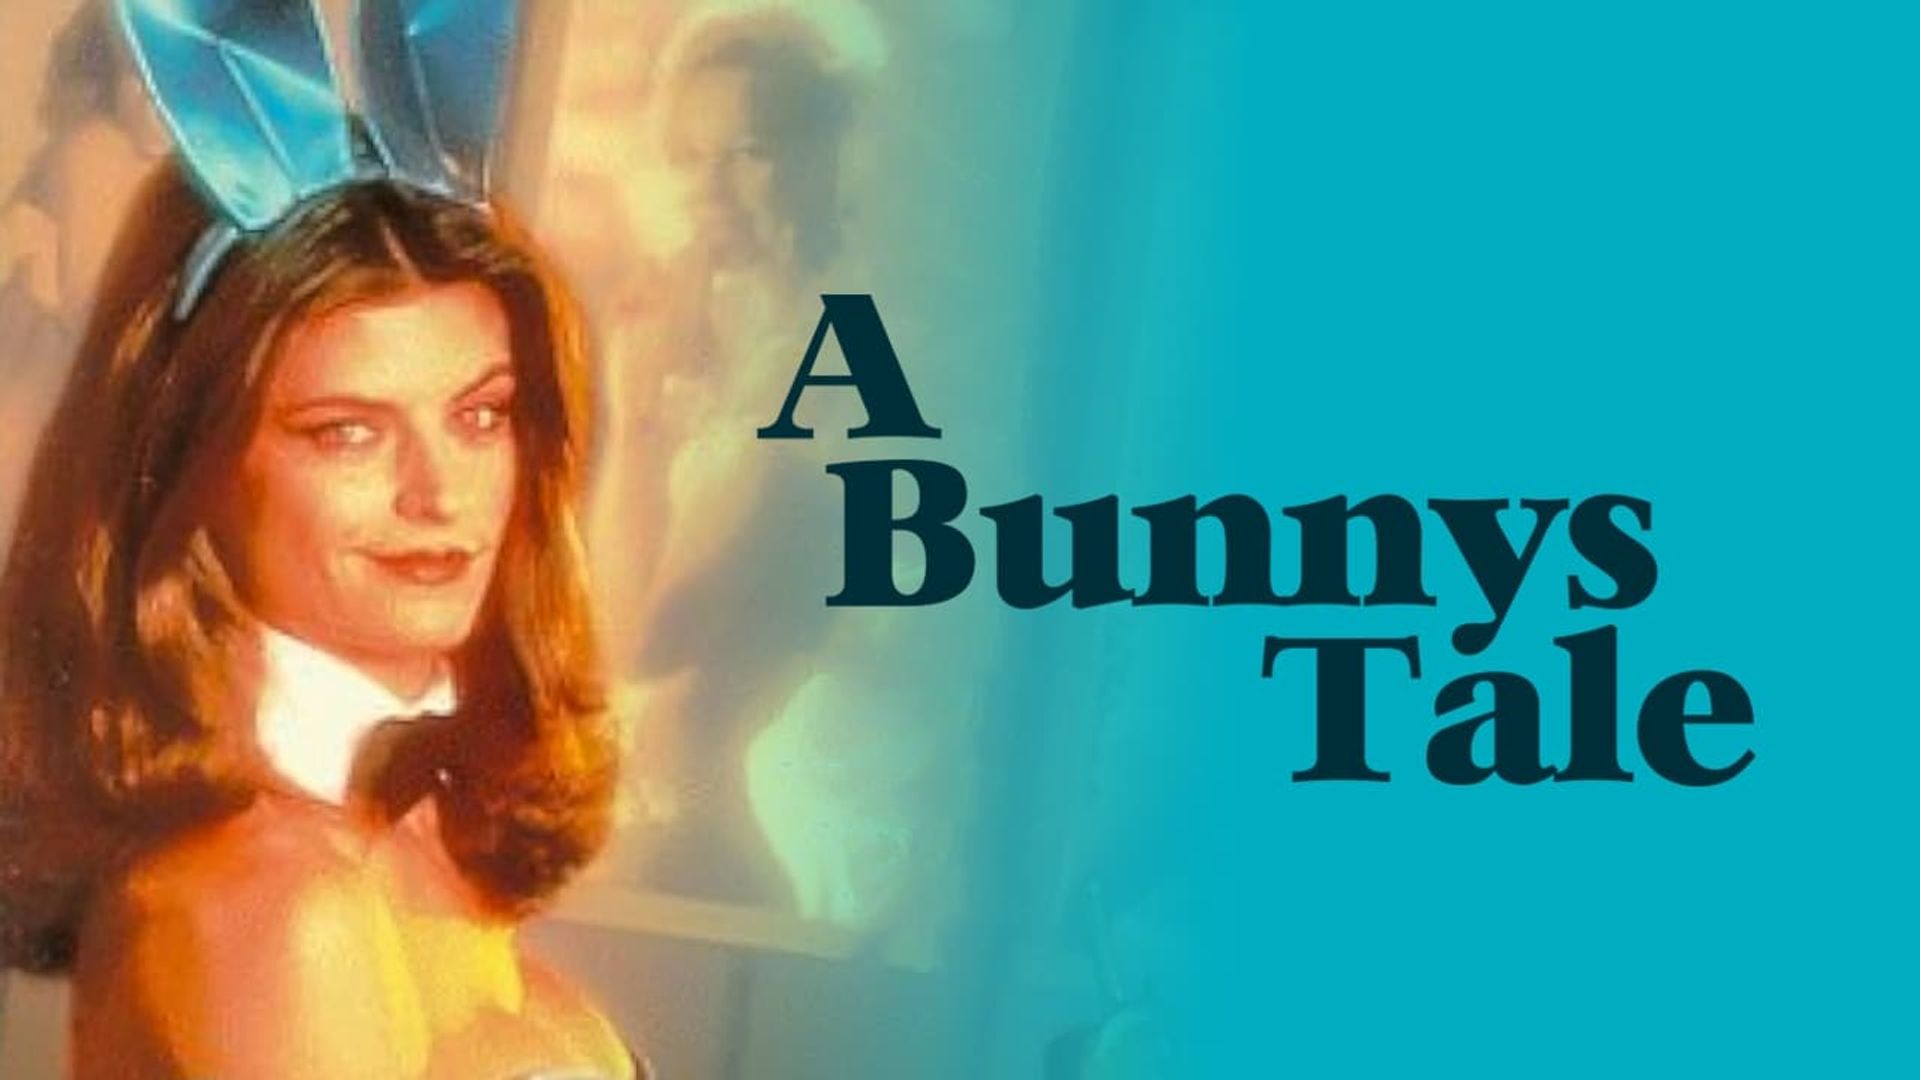 A Bunny's Tale background